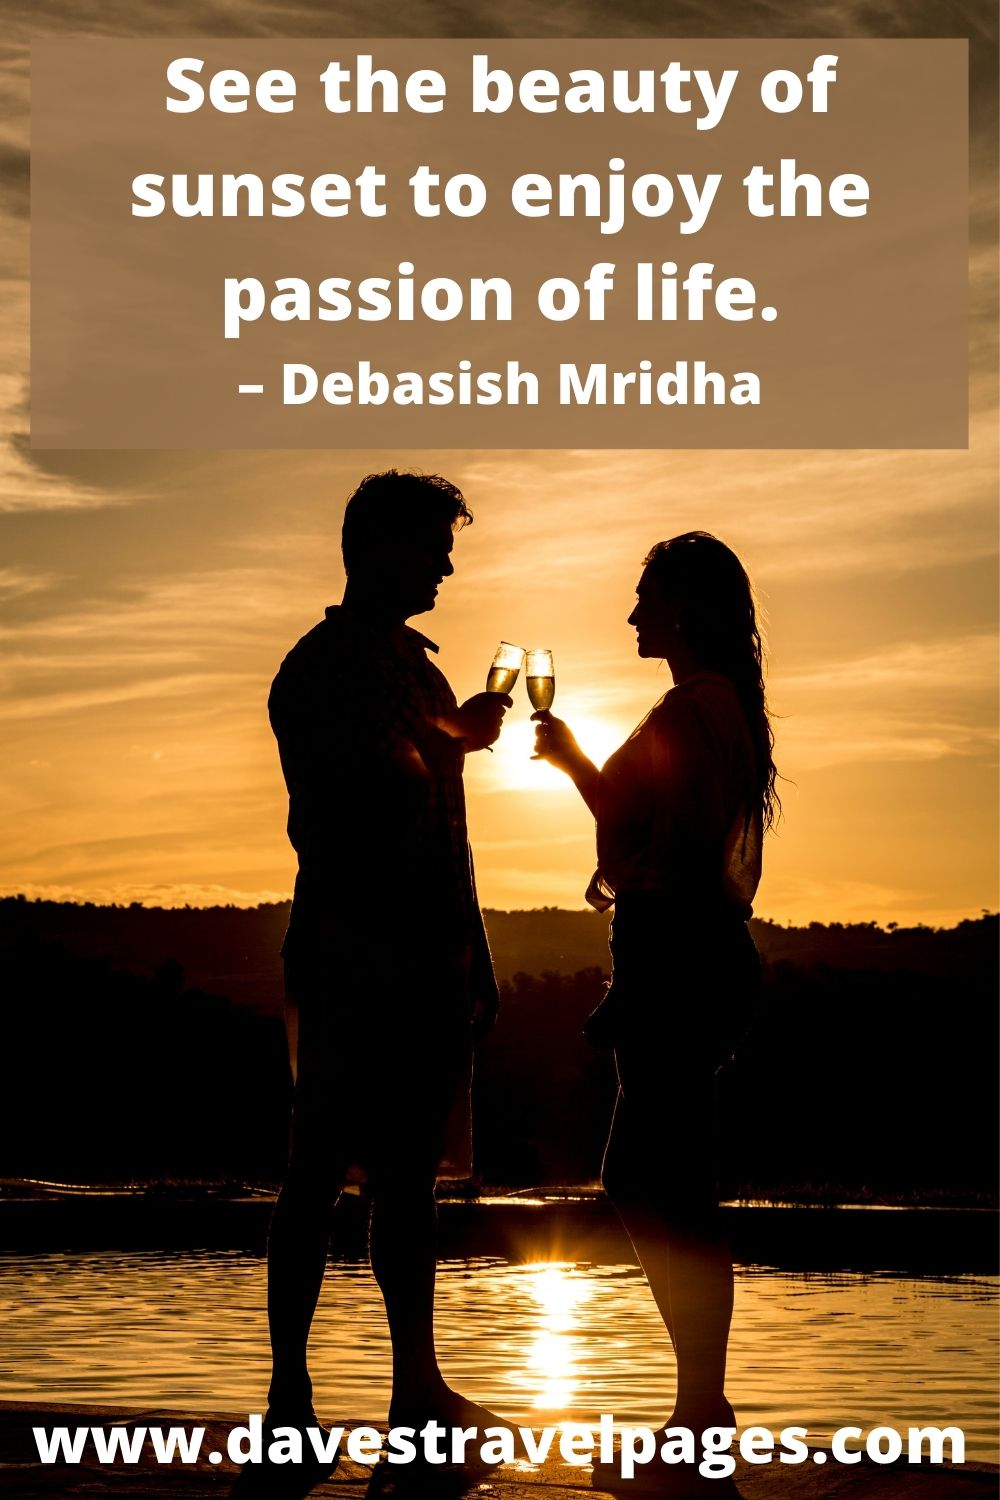 See the beauty of sunset to enjoy the passion of life. – Debasish Mridha